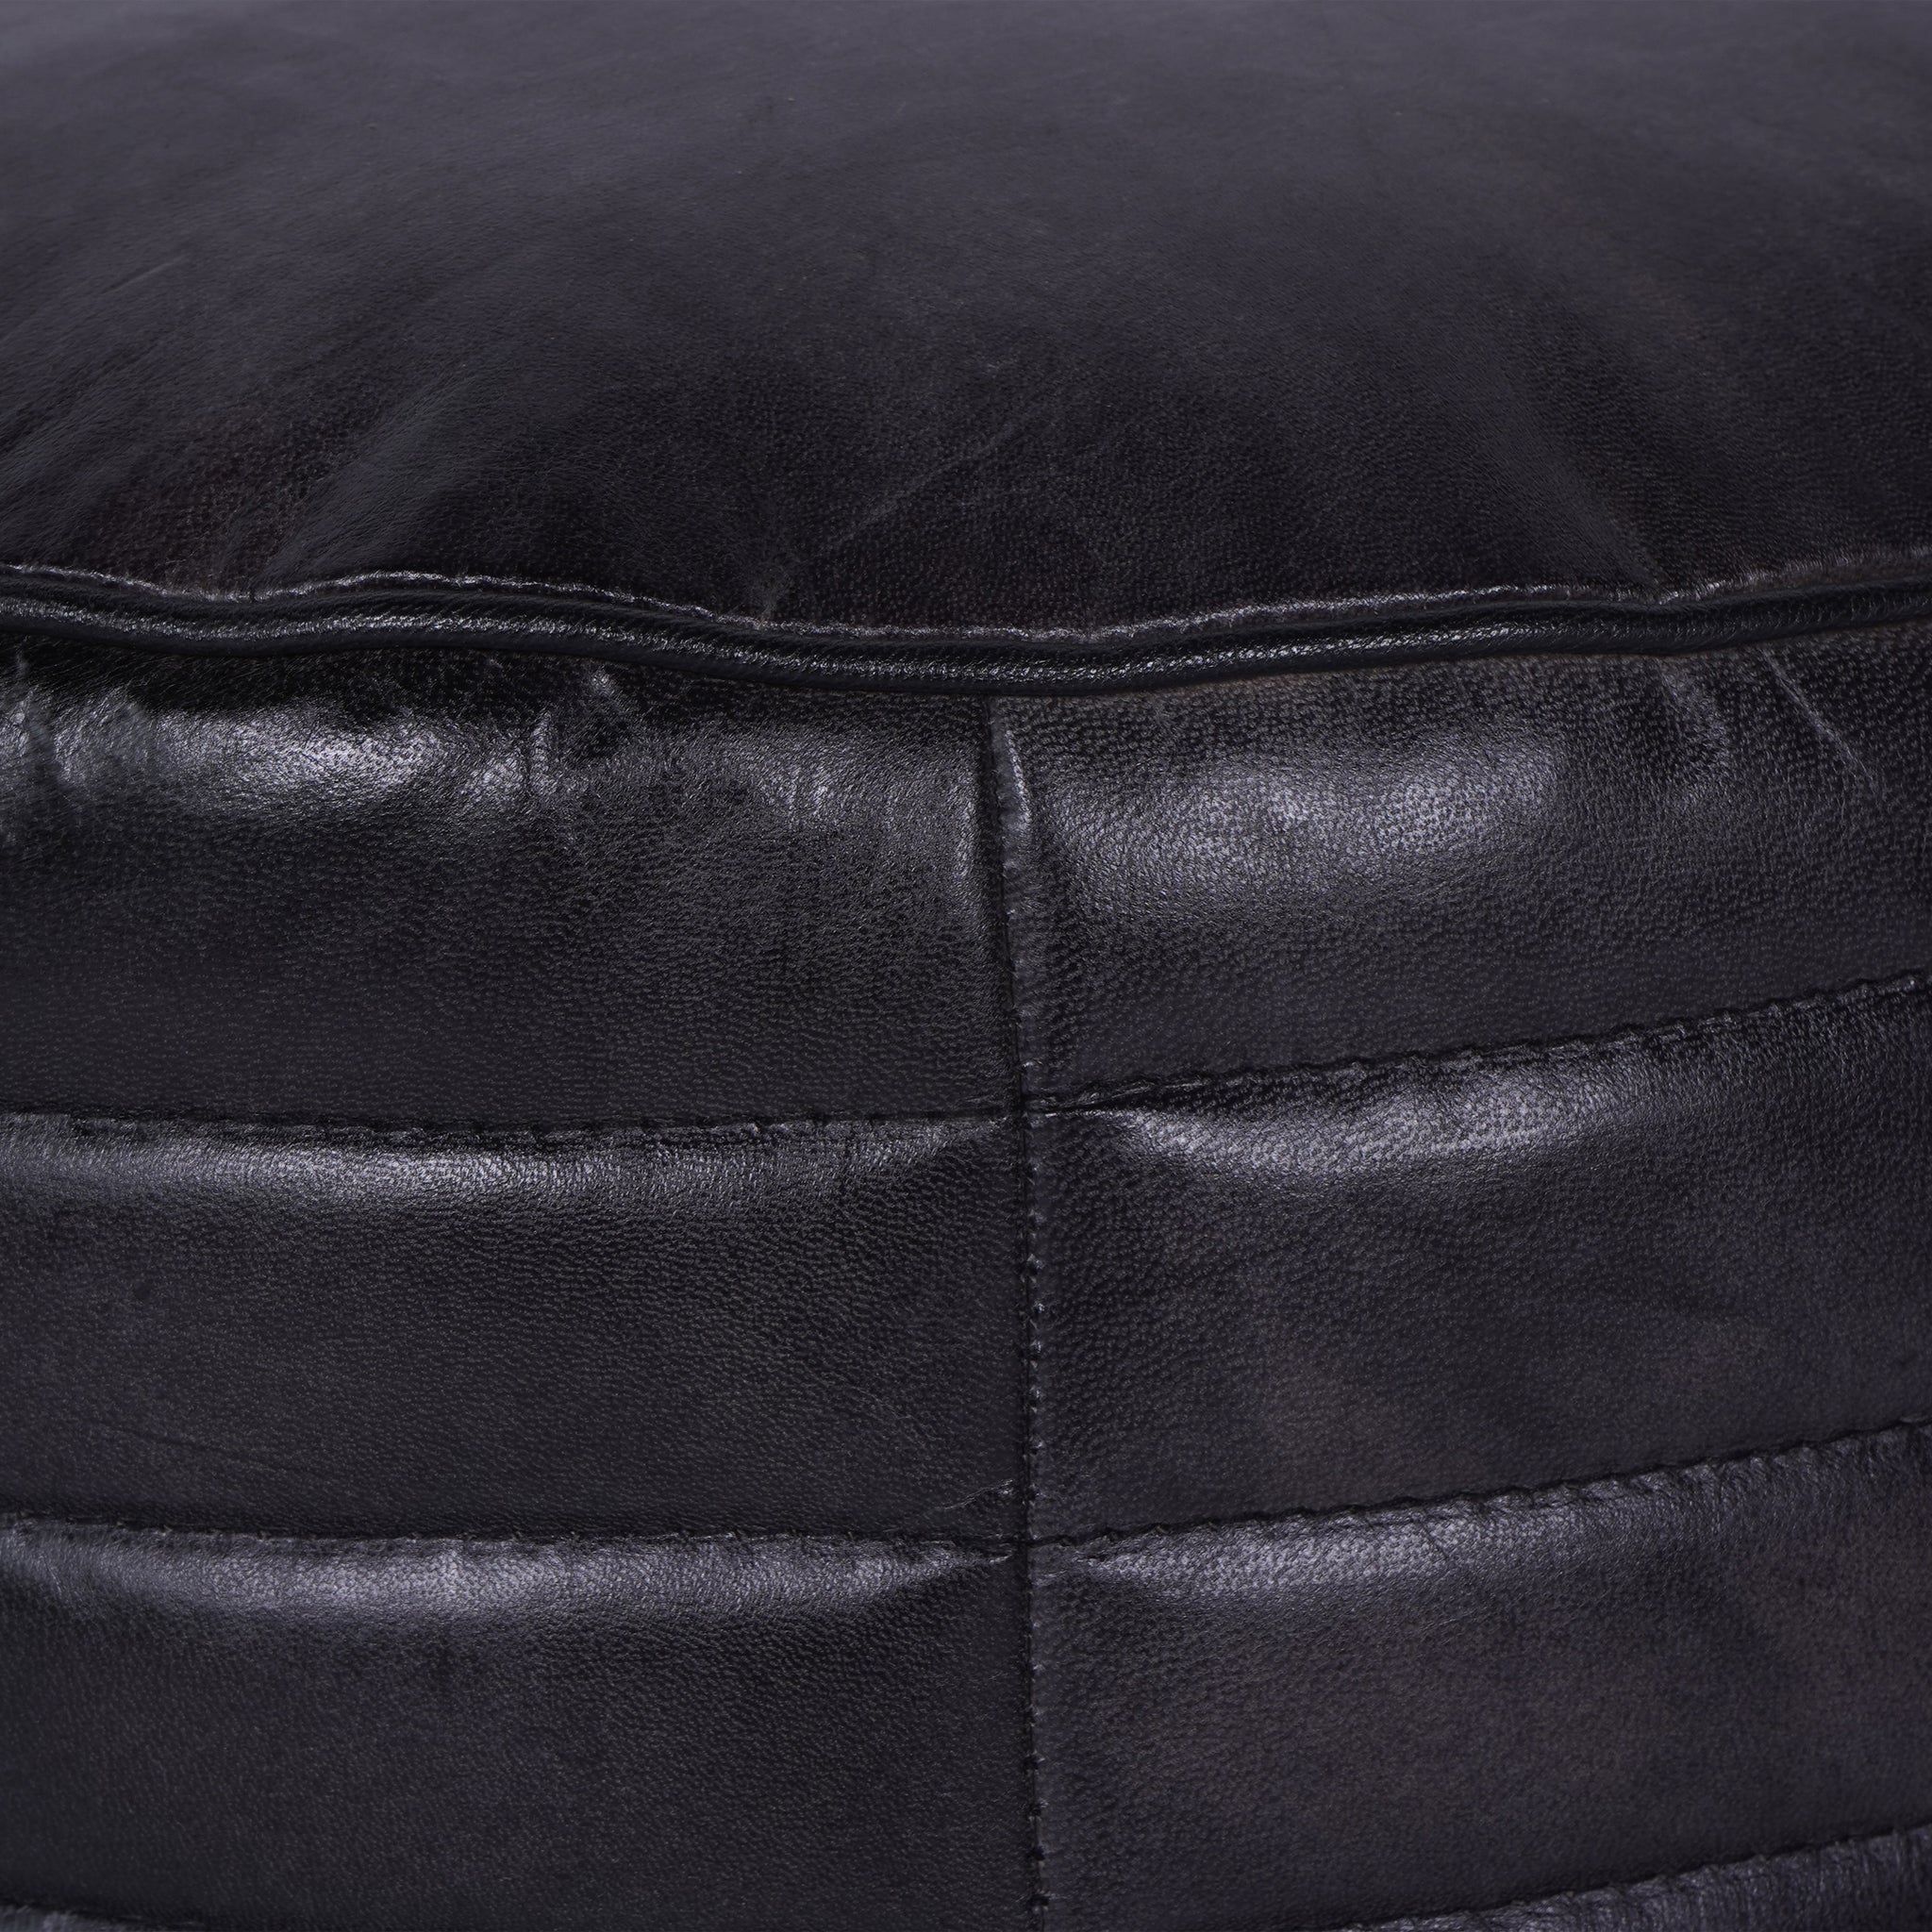 Round Leather Pouffe in Charcoal